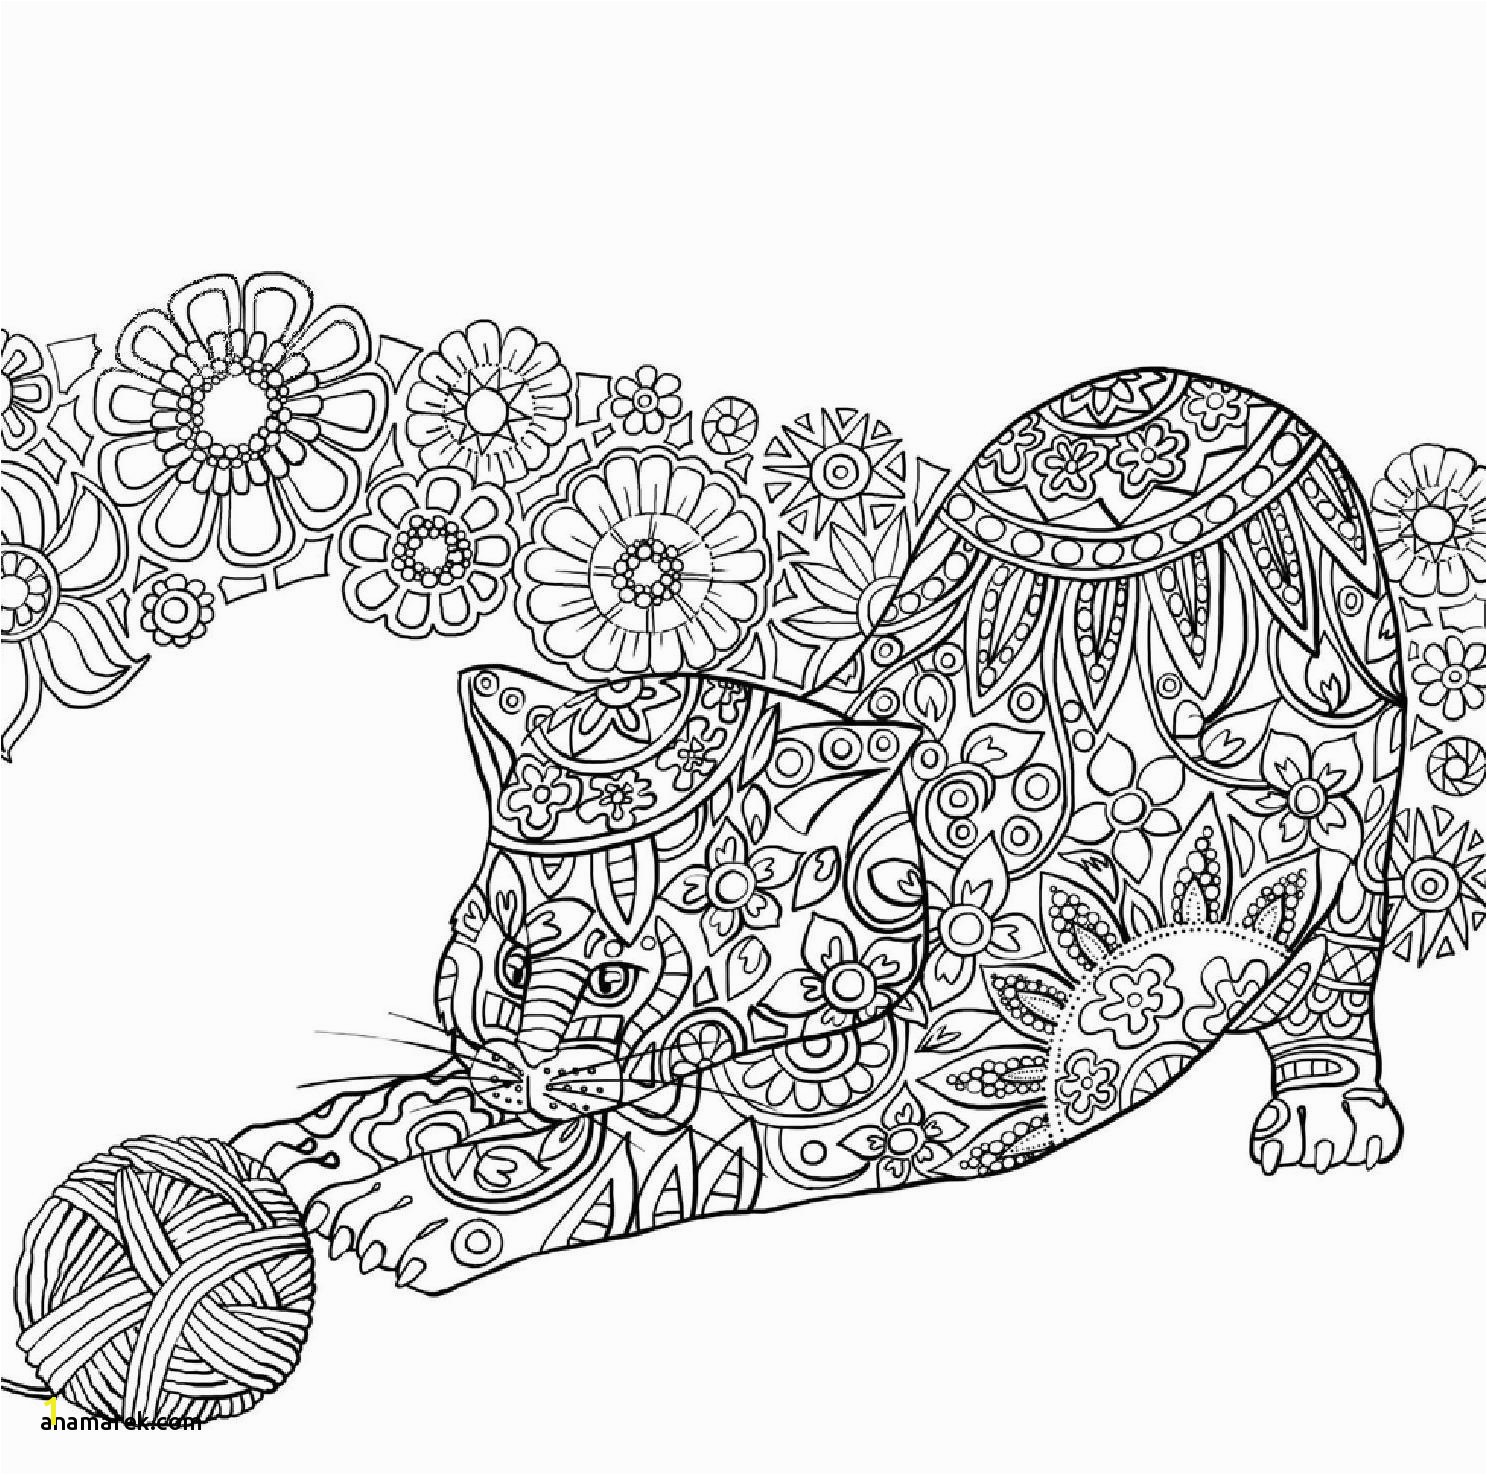 Pumpkin Coloring Pages Pdf Cat and Pumpkin Coloring Page Inspirational 21 Halloween Coloring